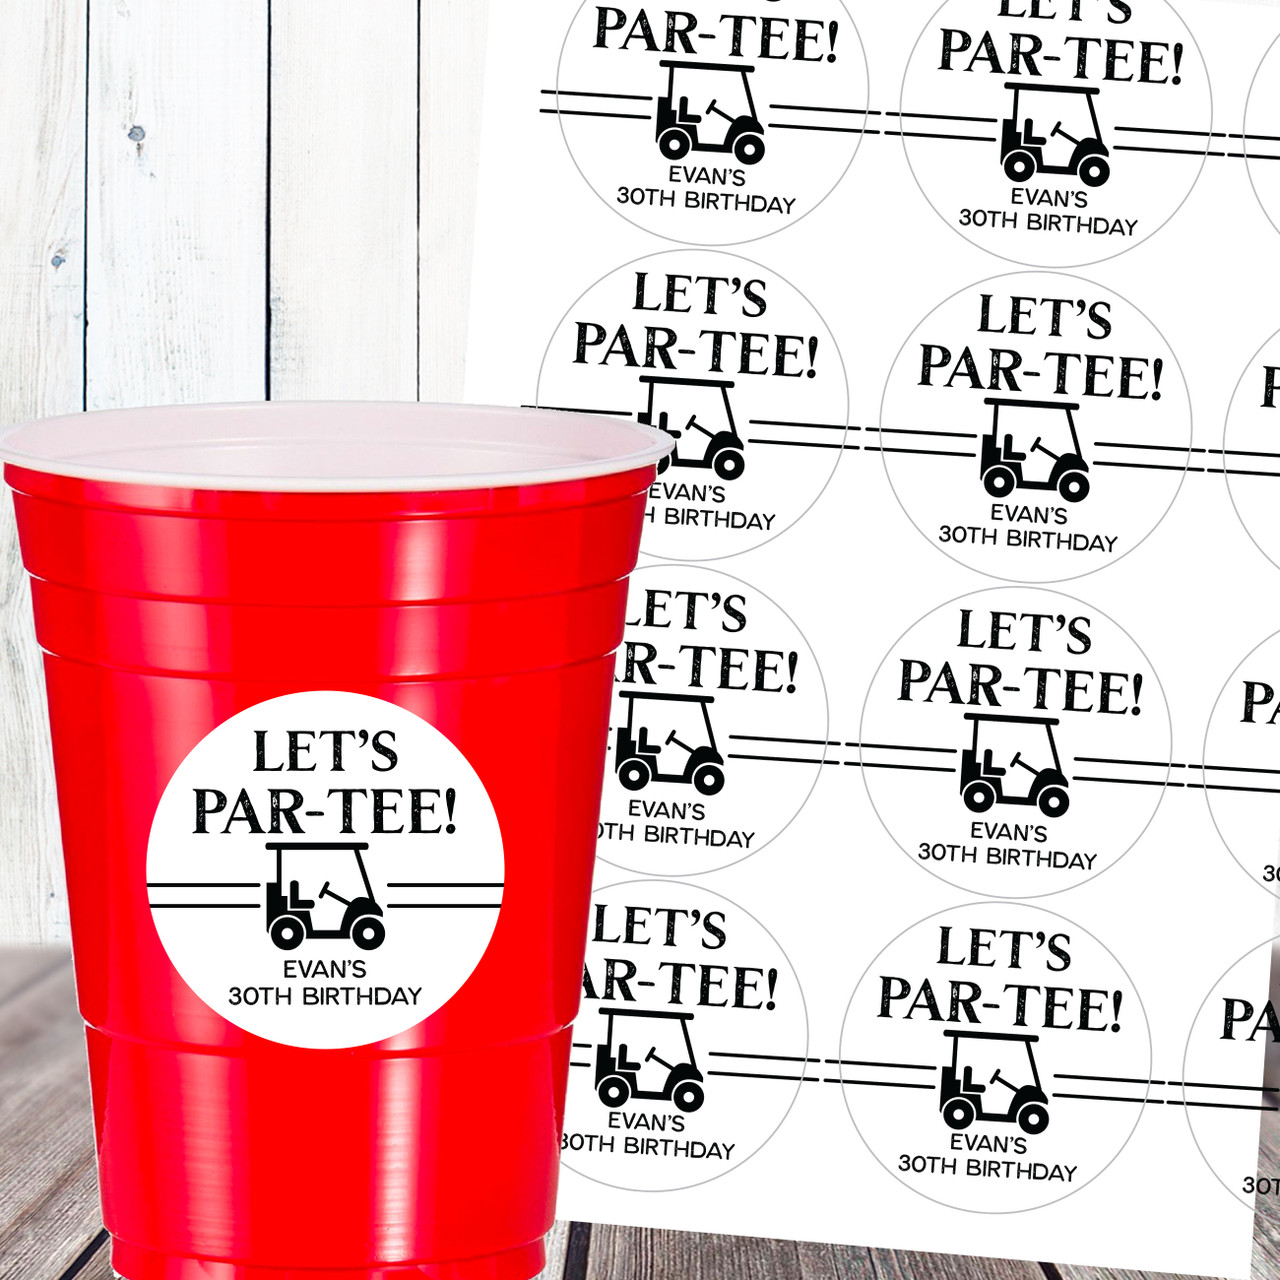 https://cdn11.bigcommerce.com/s-5grzuu6/images/stencil/1280x1280/products/6181/48195/Golf-Party_Decor_Custom_Cup-Labels__16330.1674602321.jpg?c=2